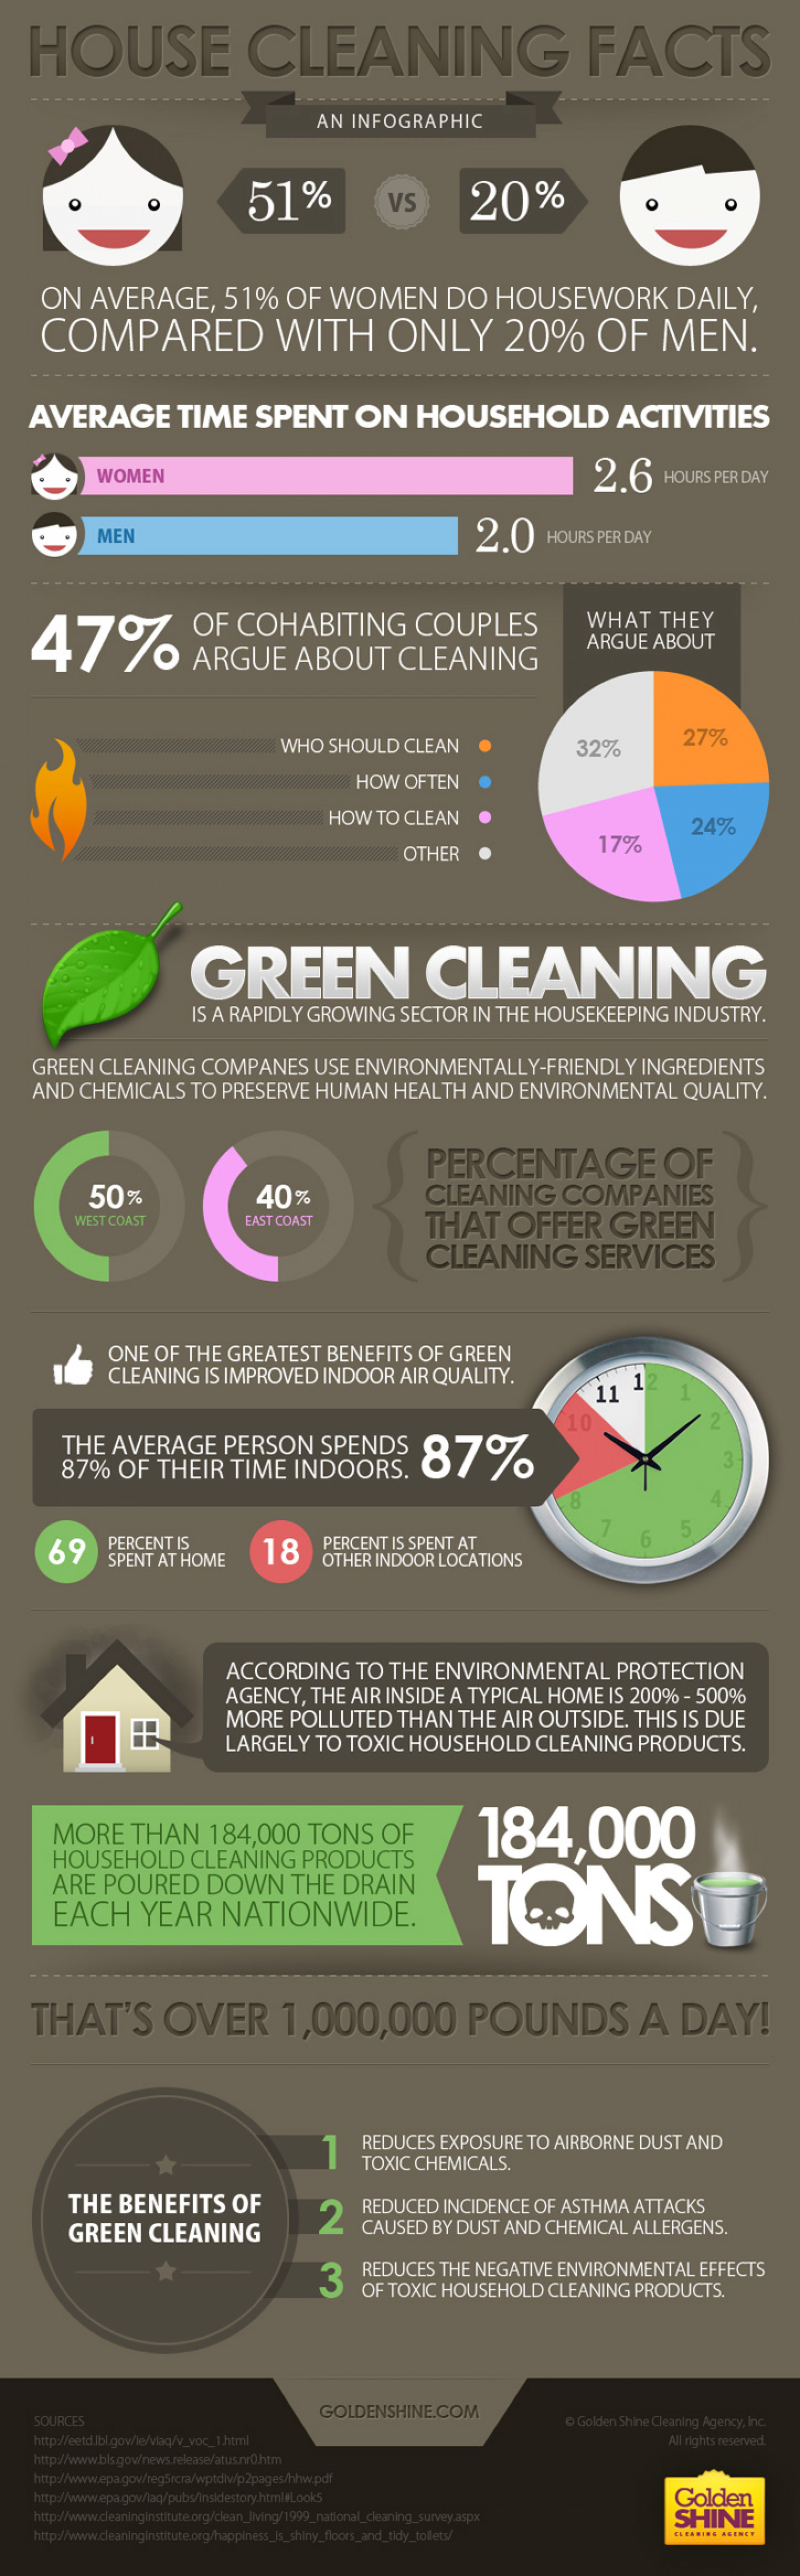 House Cleaning Facts Infographic